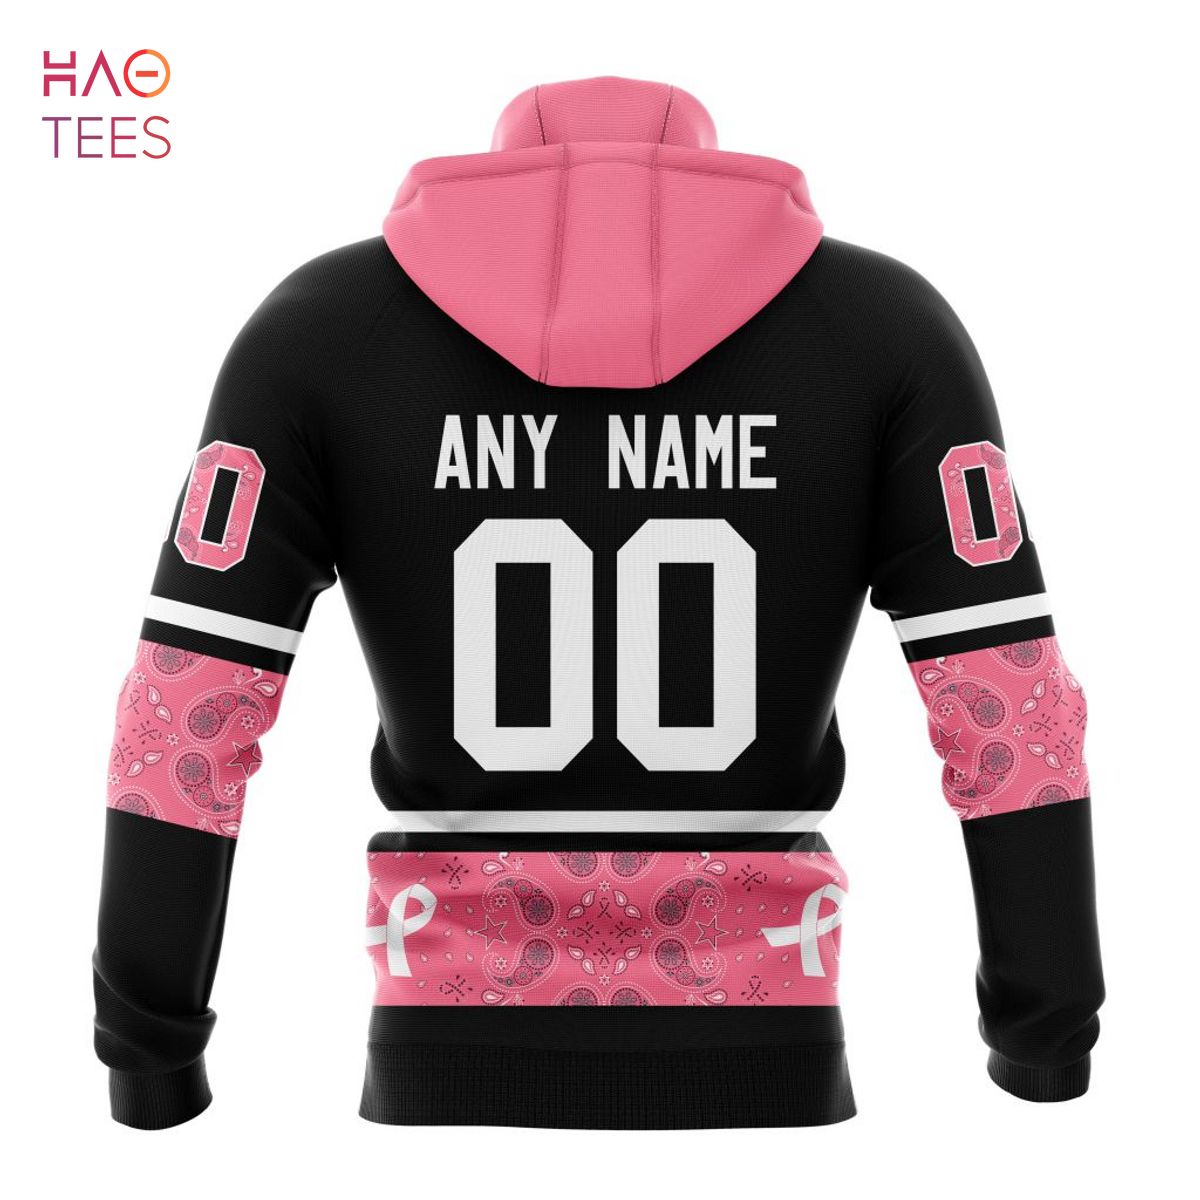 BEST NFL Dallas Cowboysls, Specialized Design In Classic Style With Paisley! IN OCTOBER WE WEAR PINK BREAST CANCER 3D Hoodie